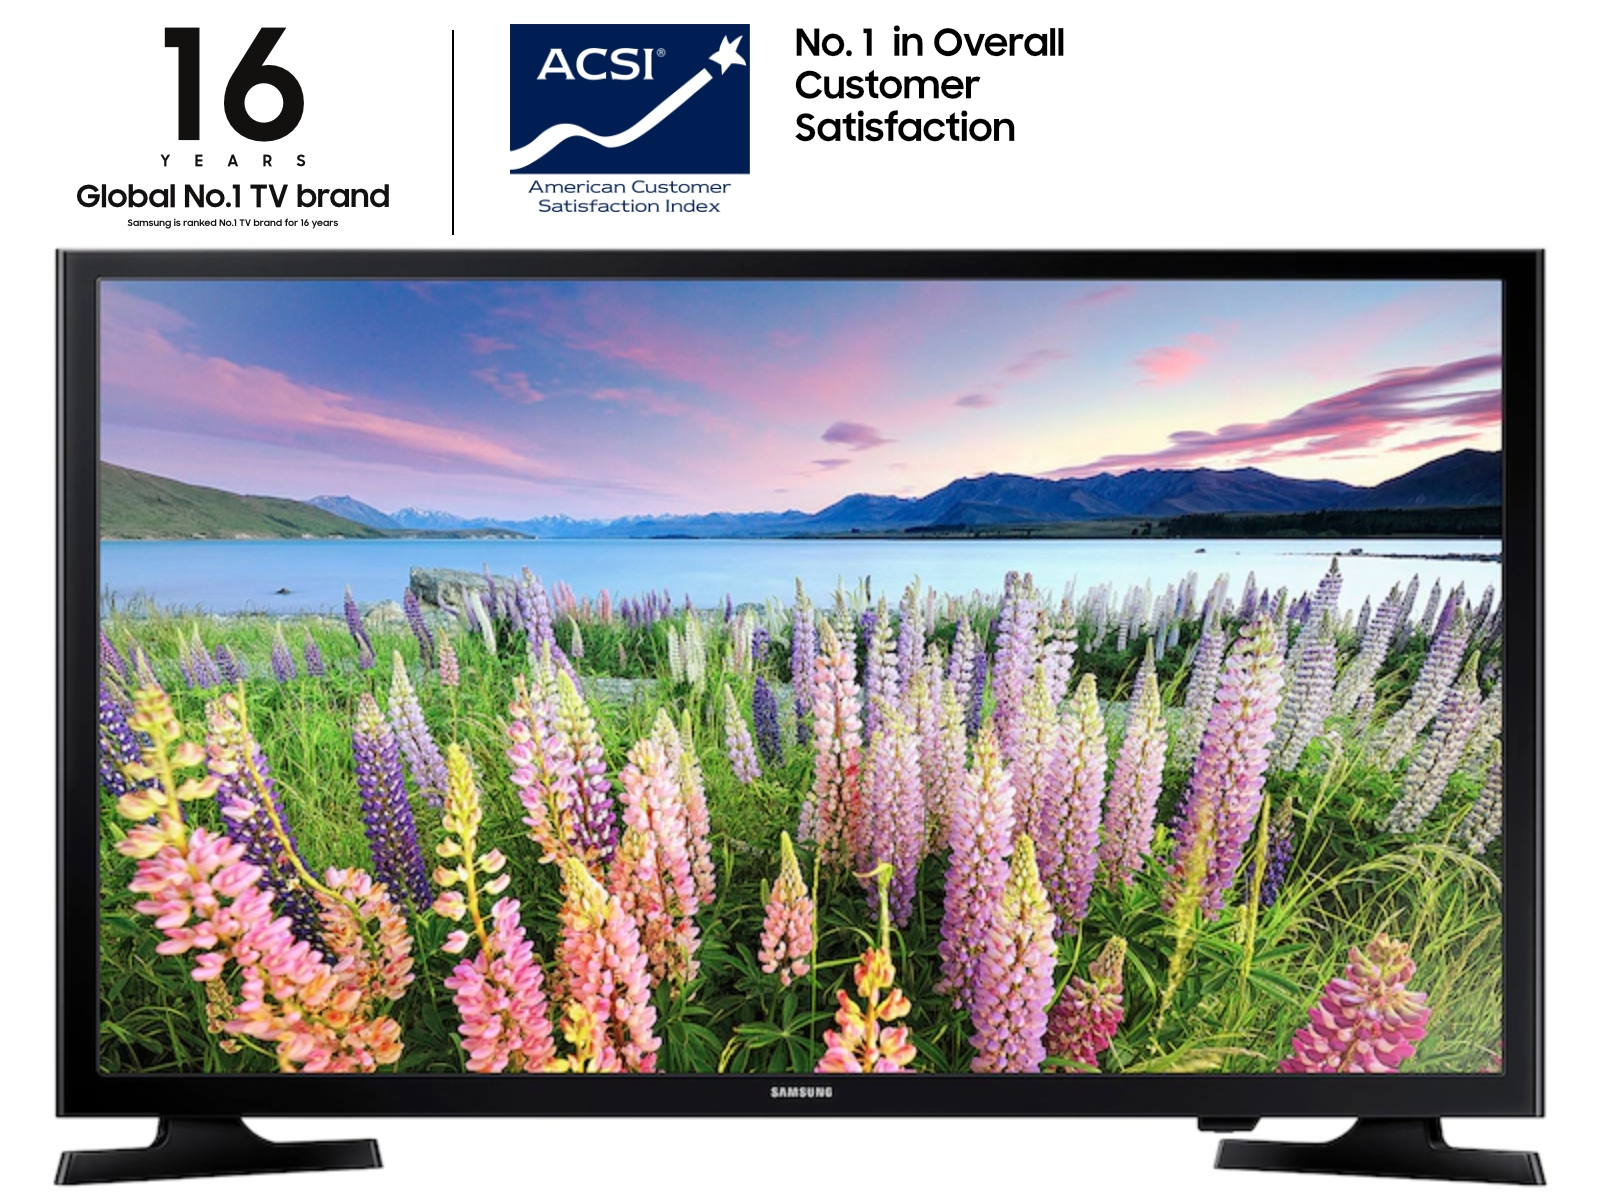 Revision Implement tro 40" Class N5200 Smart Full HD TV (2019) TVs - UN40N5200AFXZA | Samsung US